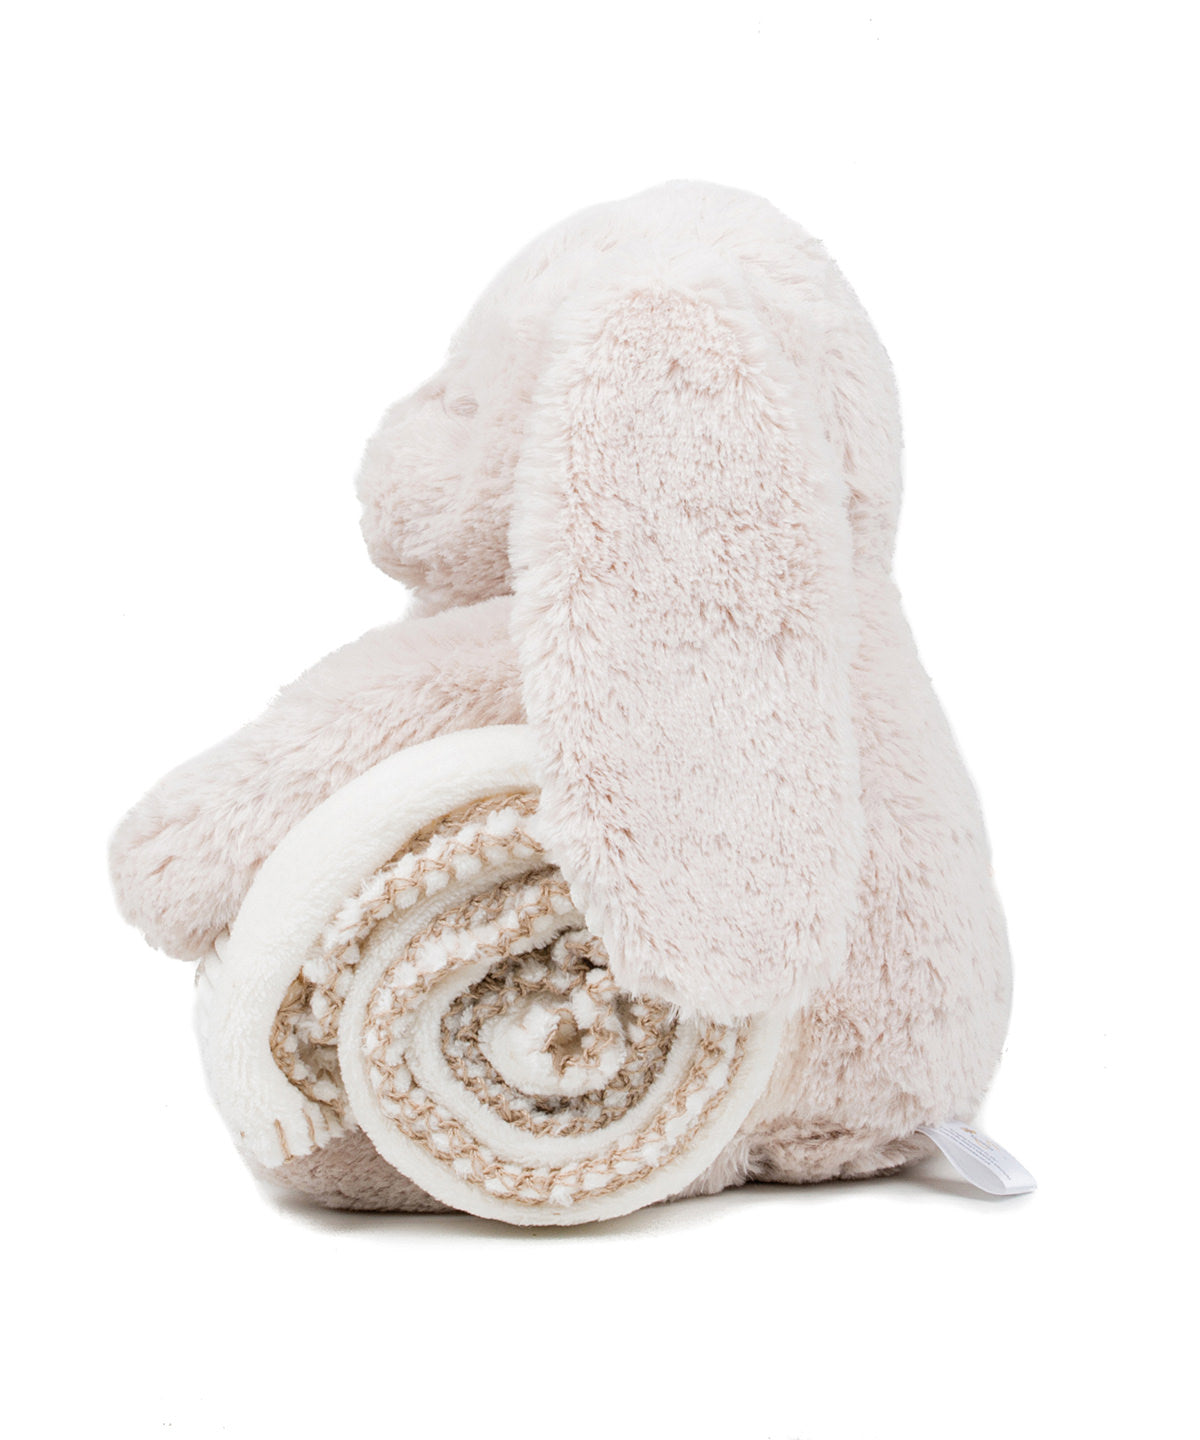 Mumbles Rabbit And Blanket - COOZO